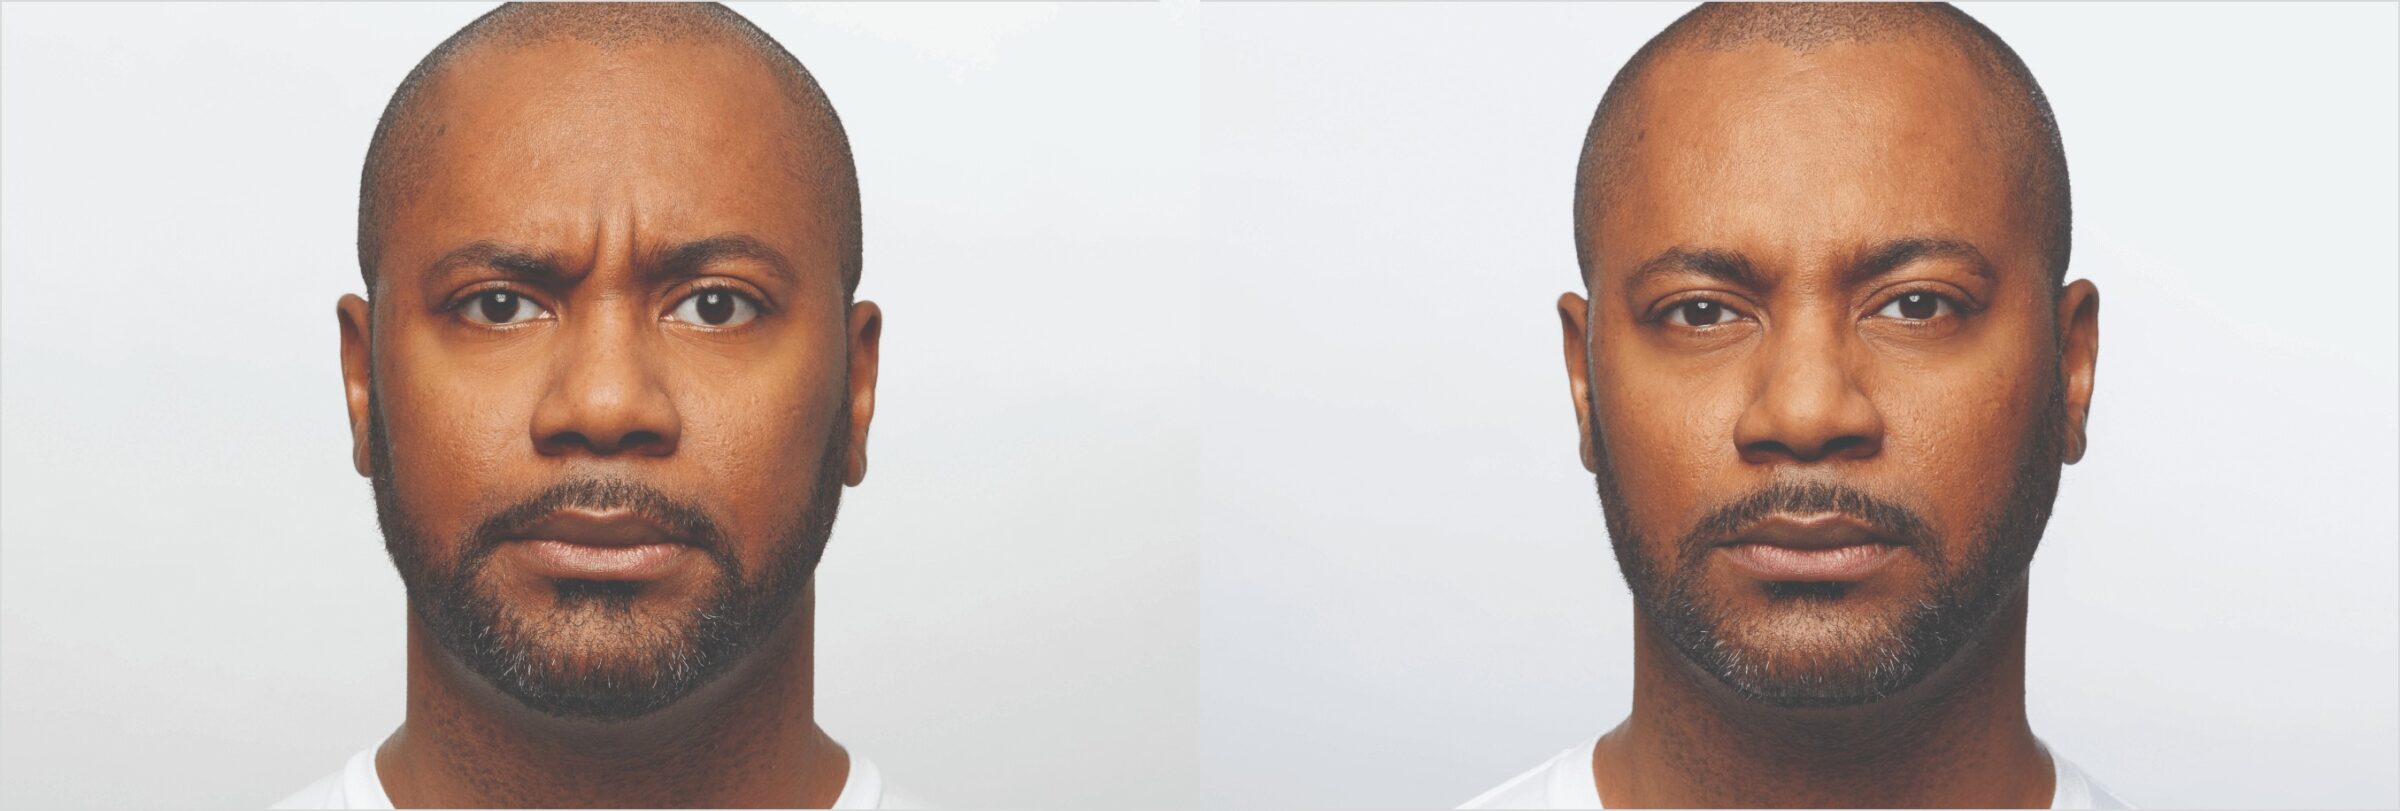 Before & after results of dysport on face